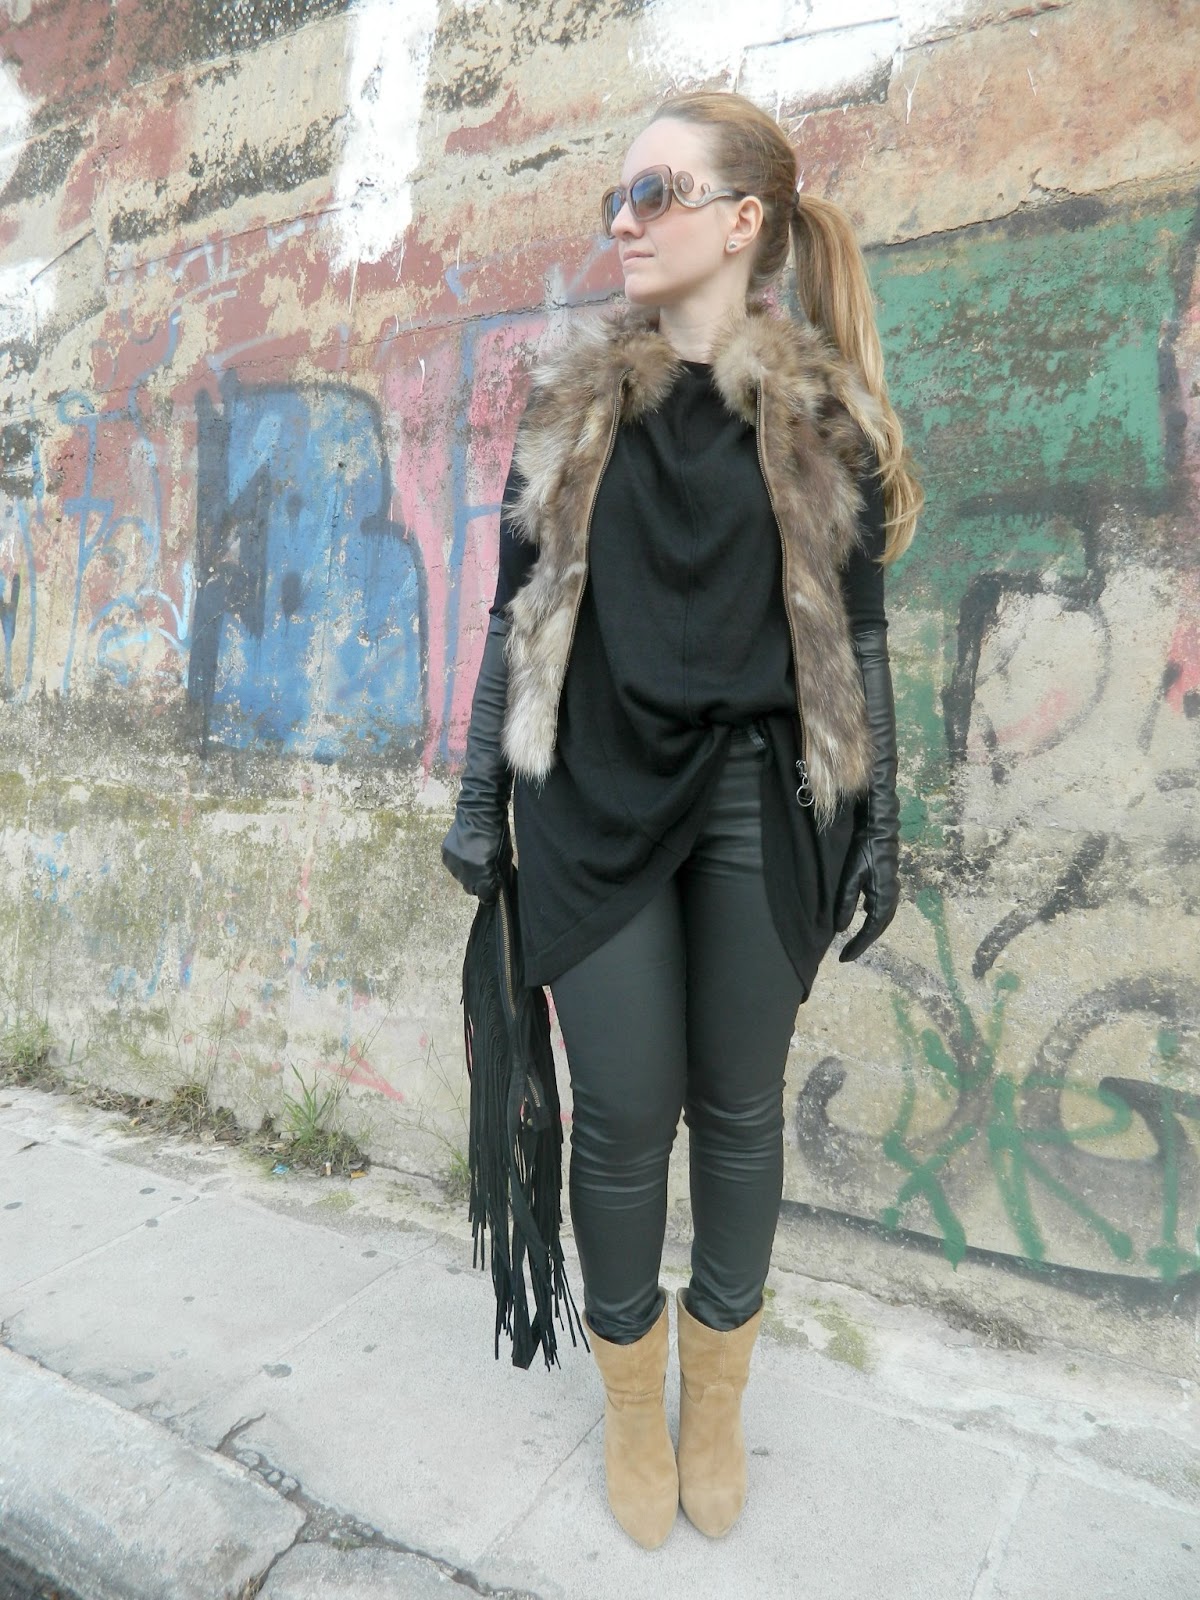 Long Leather Gloves - barefoot duchess - a personal style blog